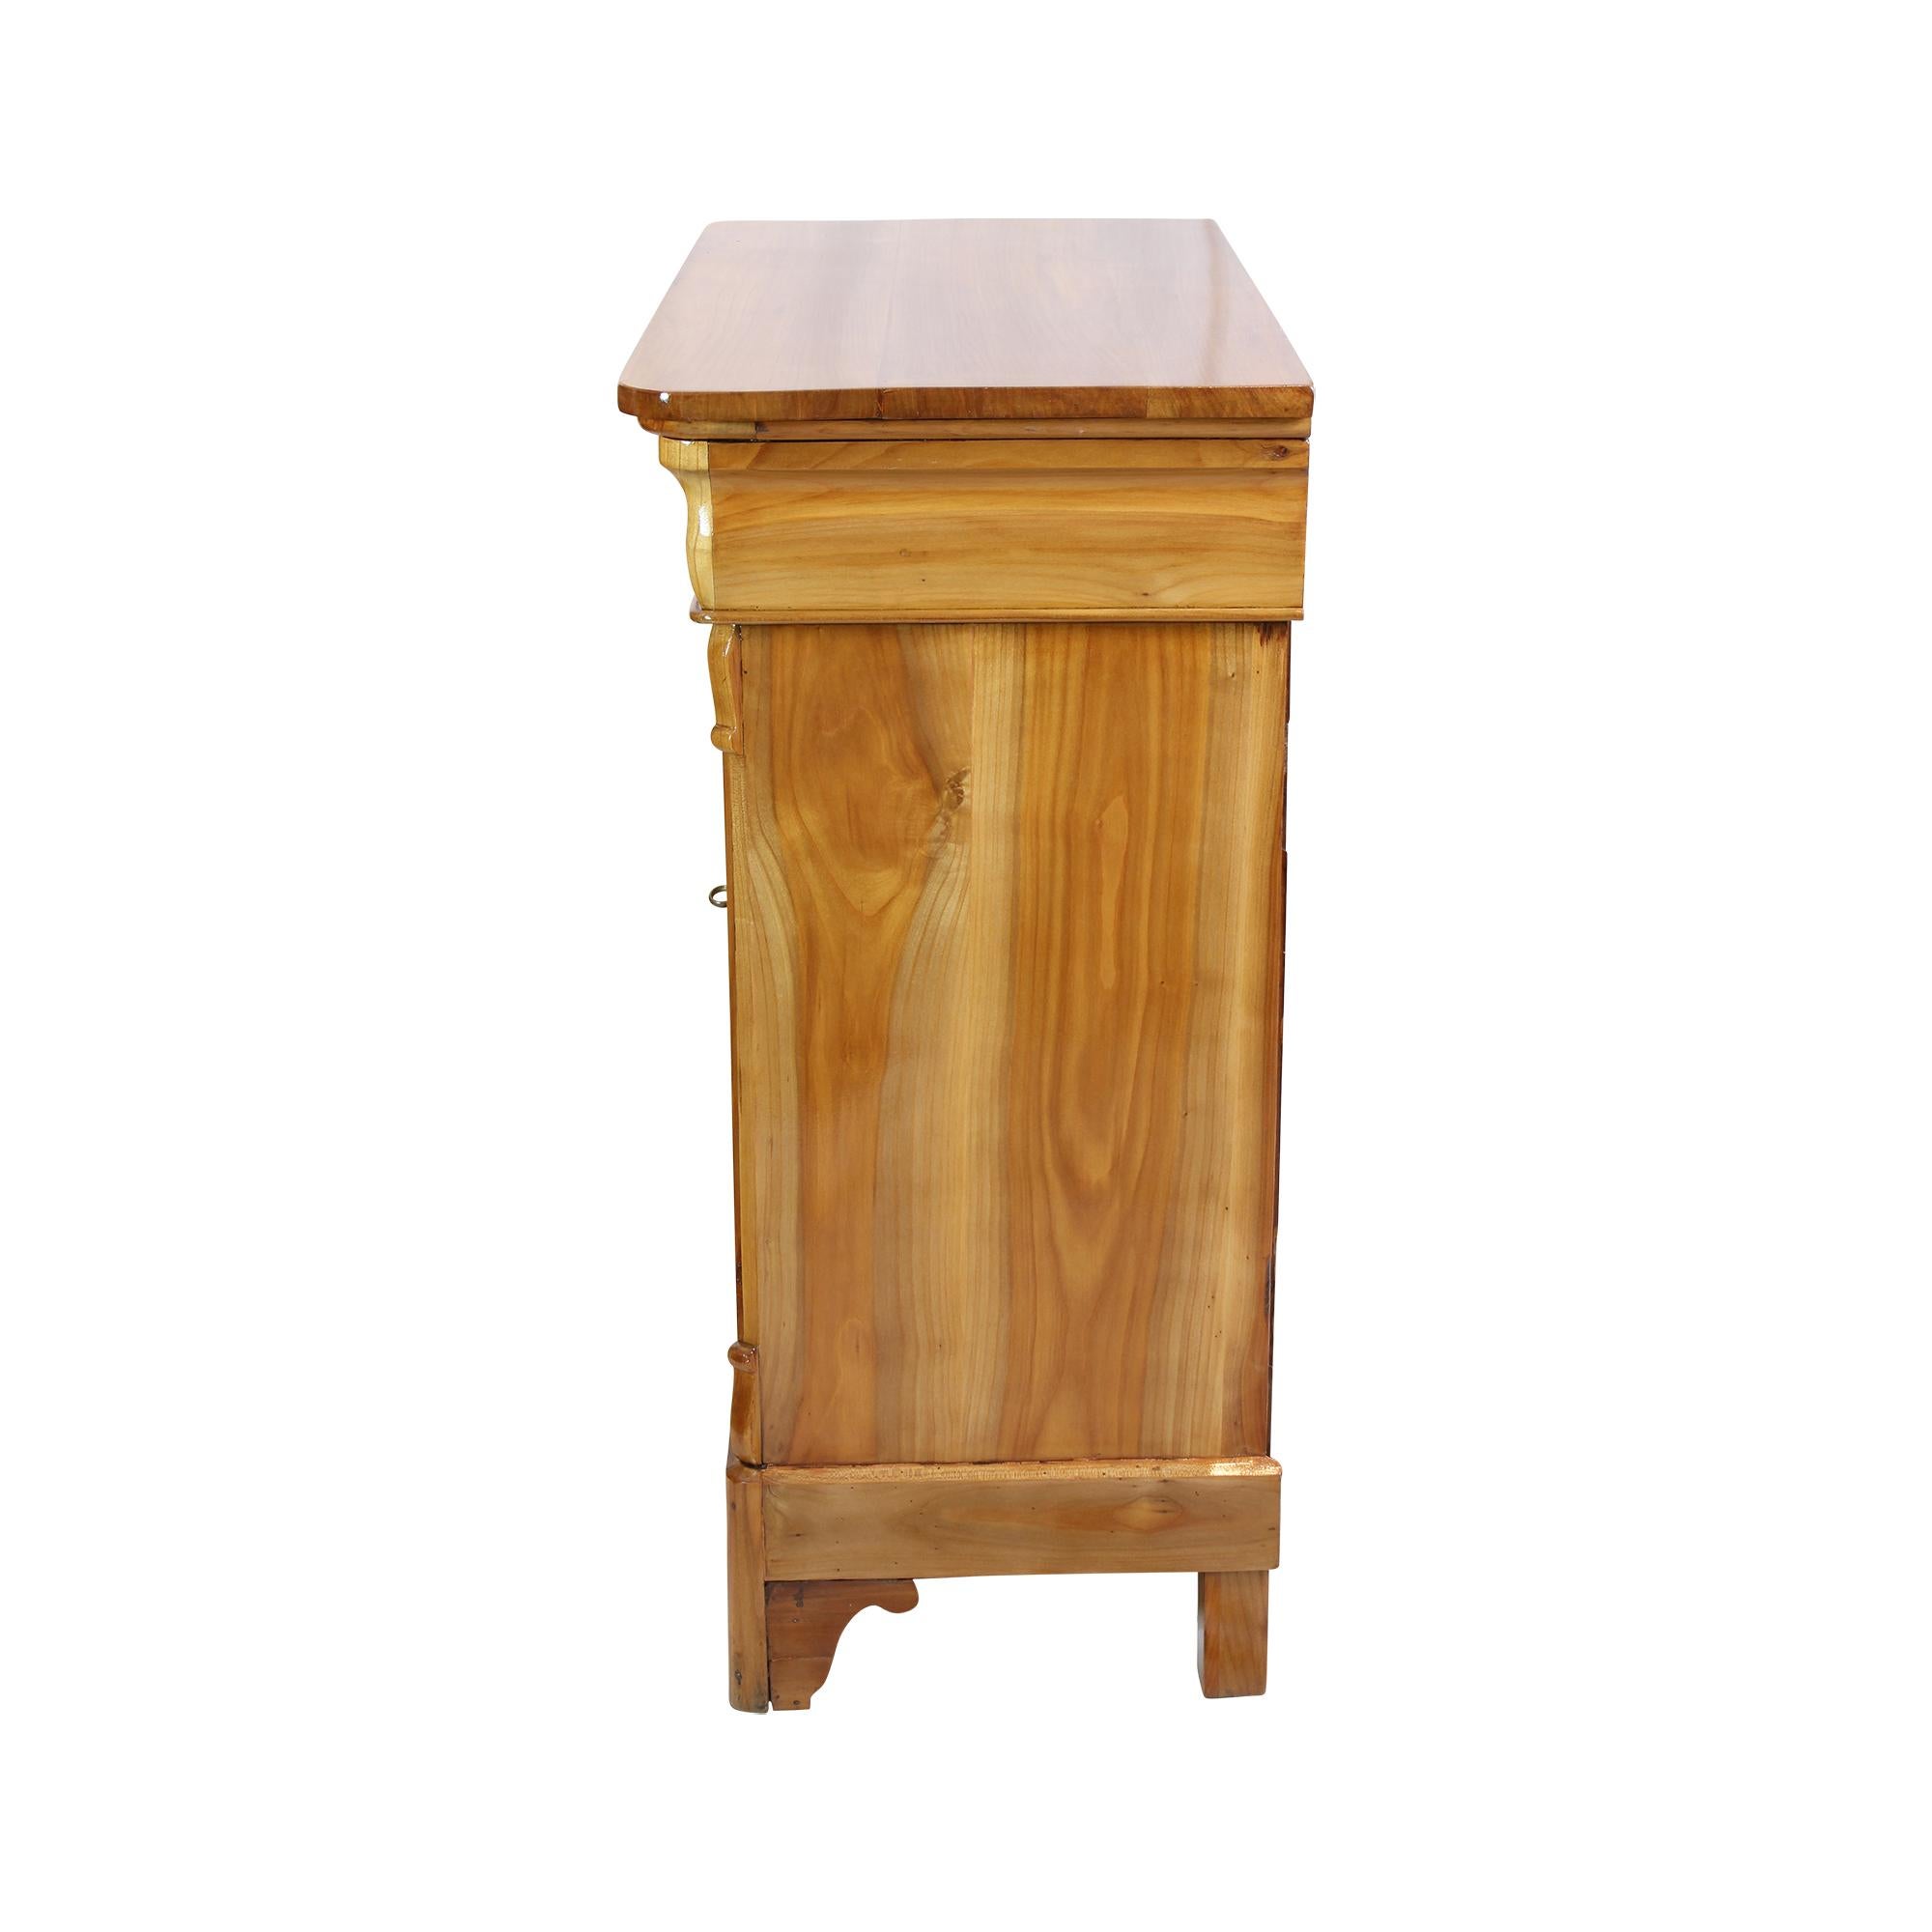 Polished Early 19th Century Biedermeier Cherrywood Half Cabinet / Commode For Sale